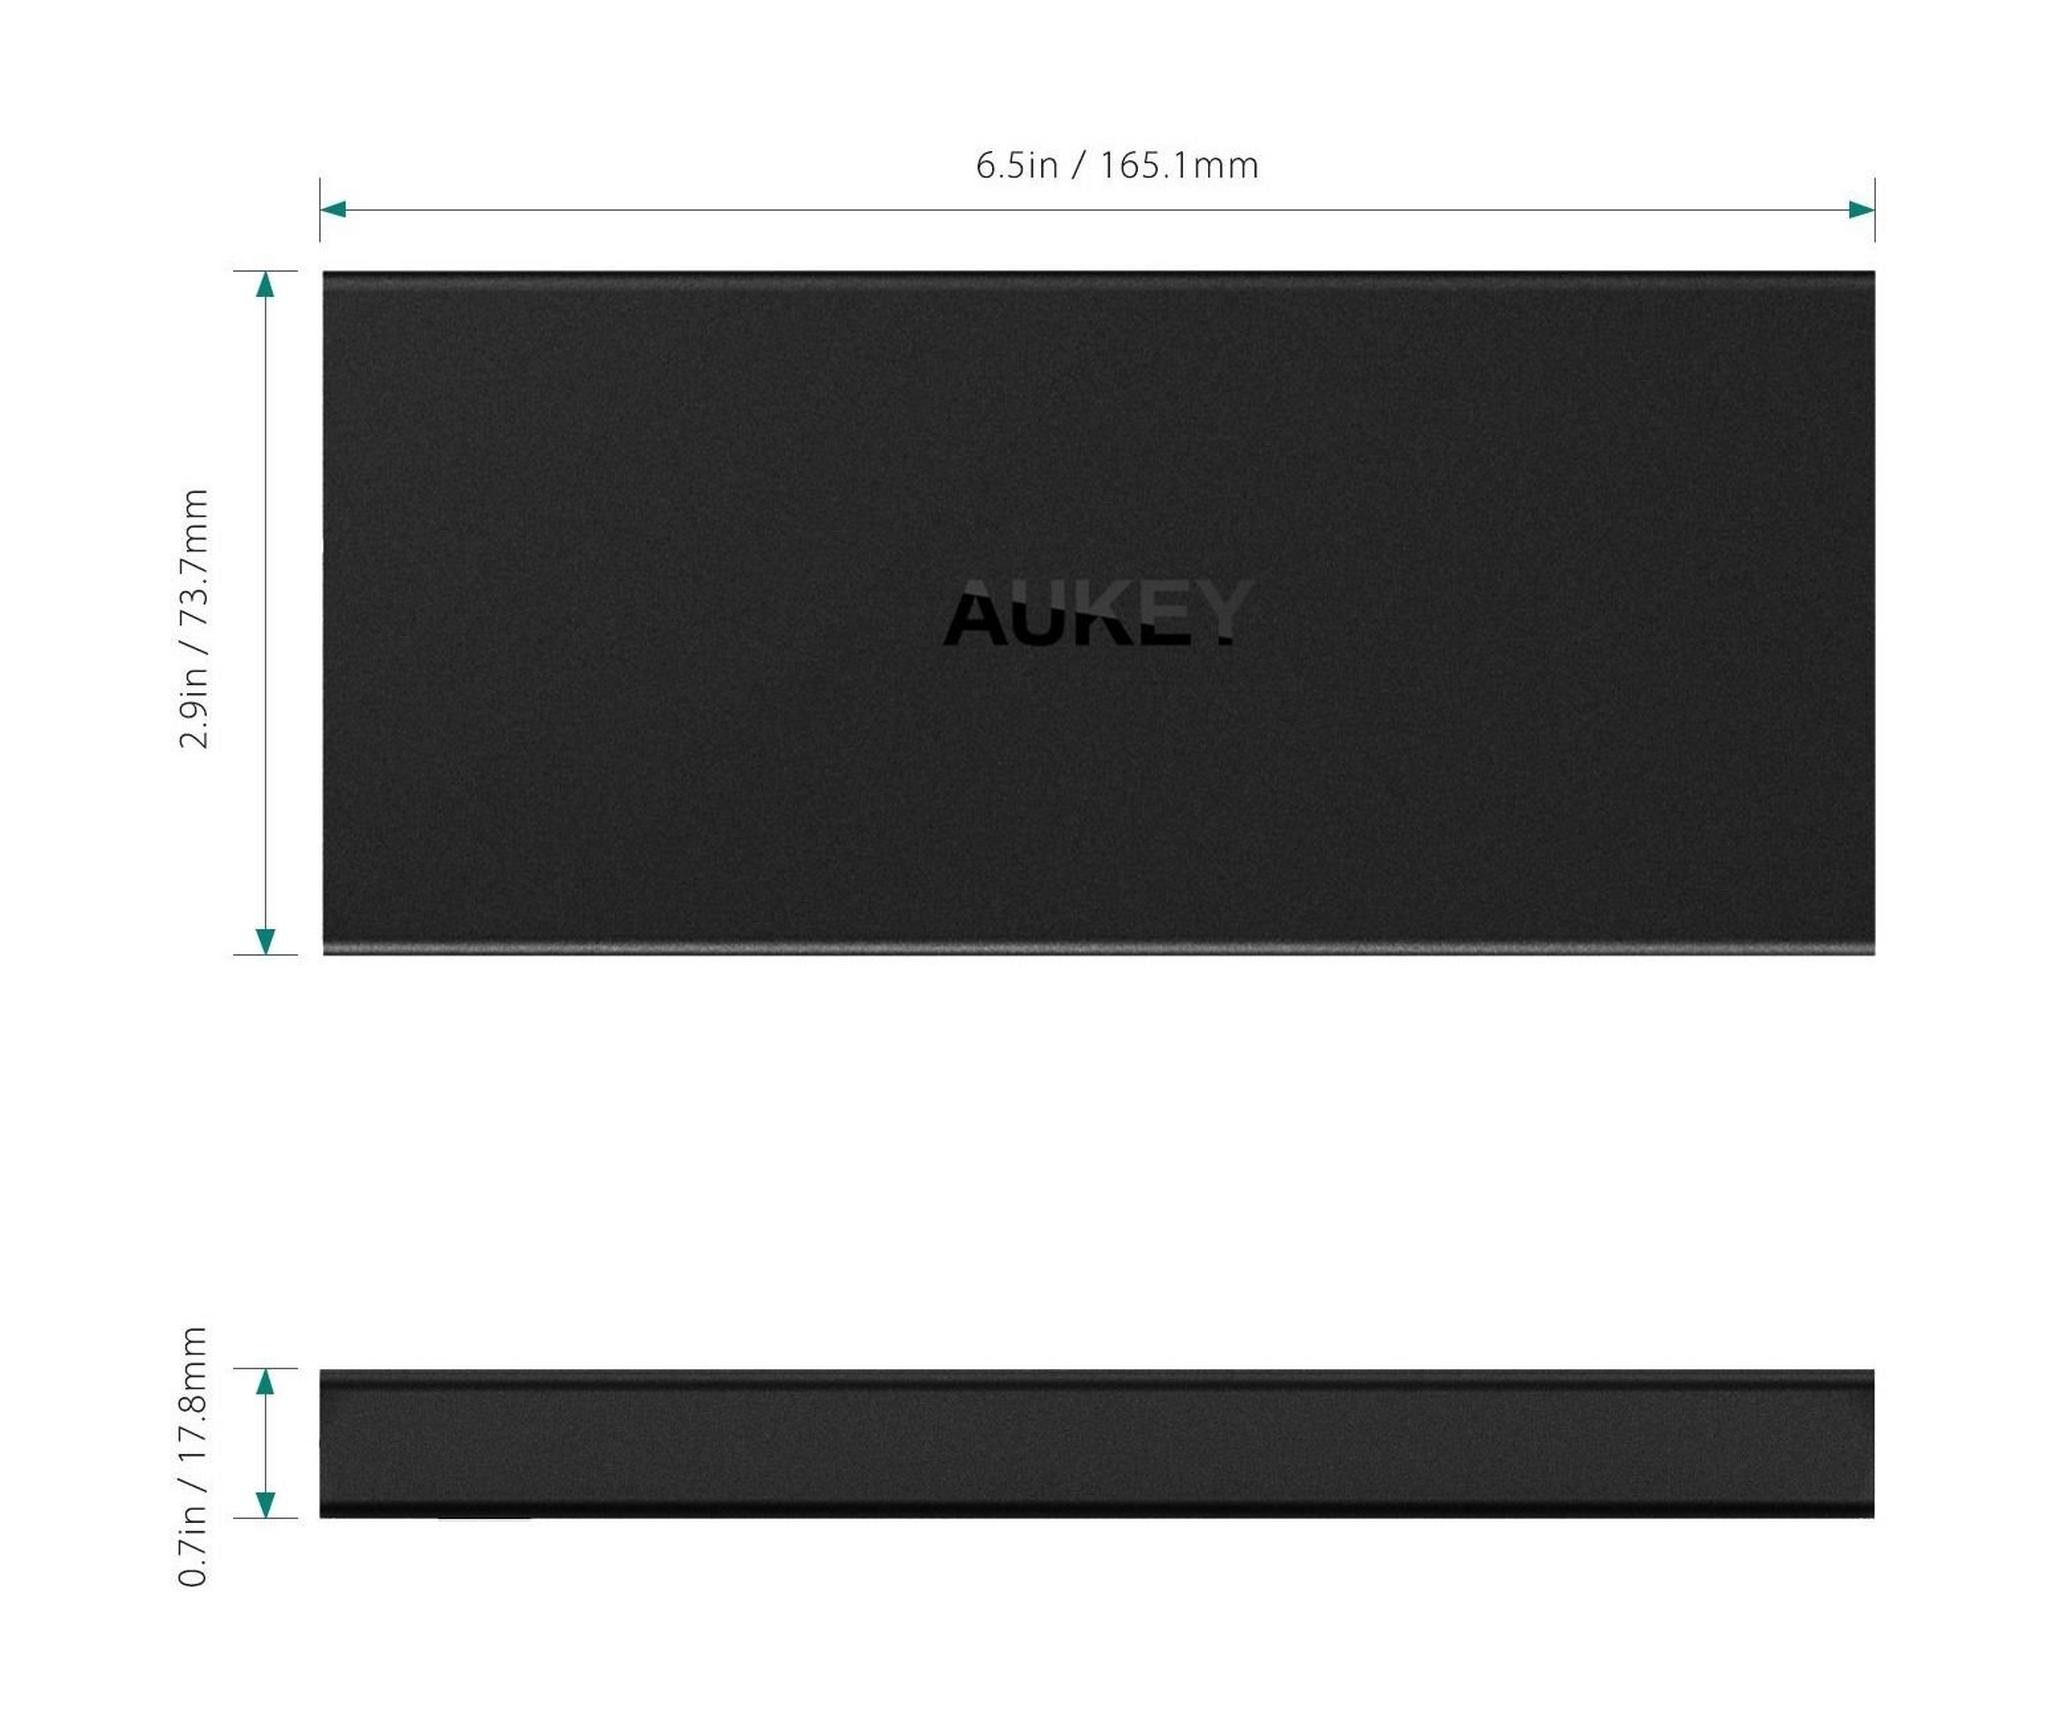 Aukey 16000mAh Quick Charge 3.0 Power Bank – Black